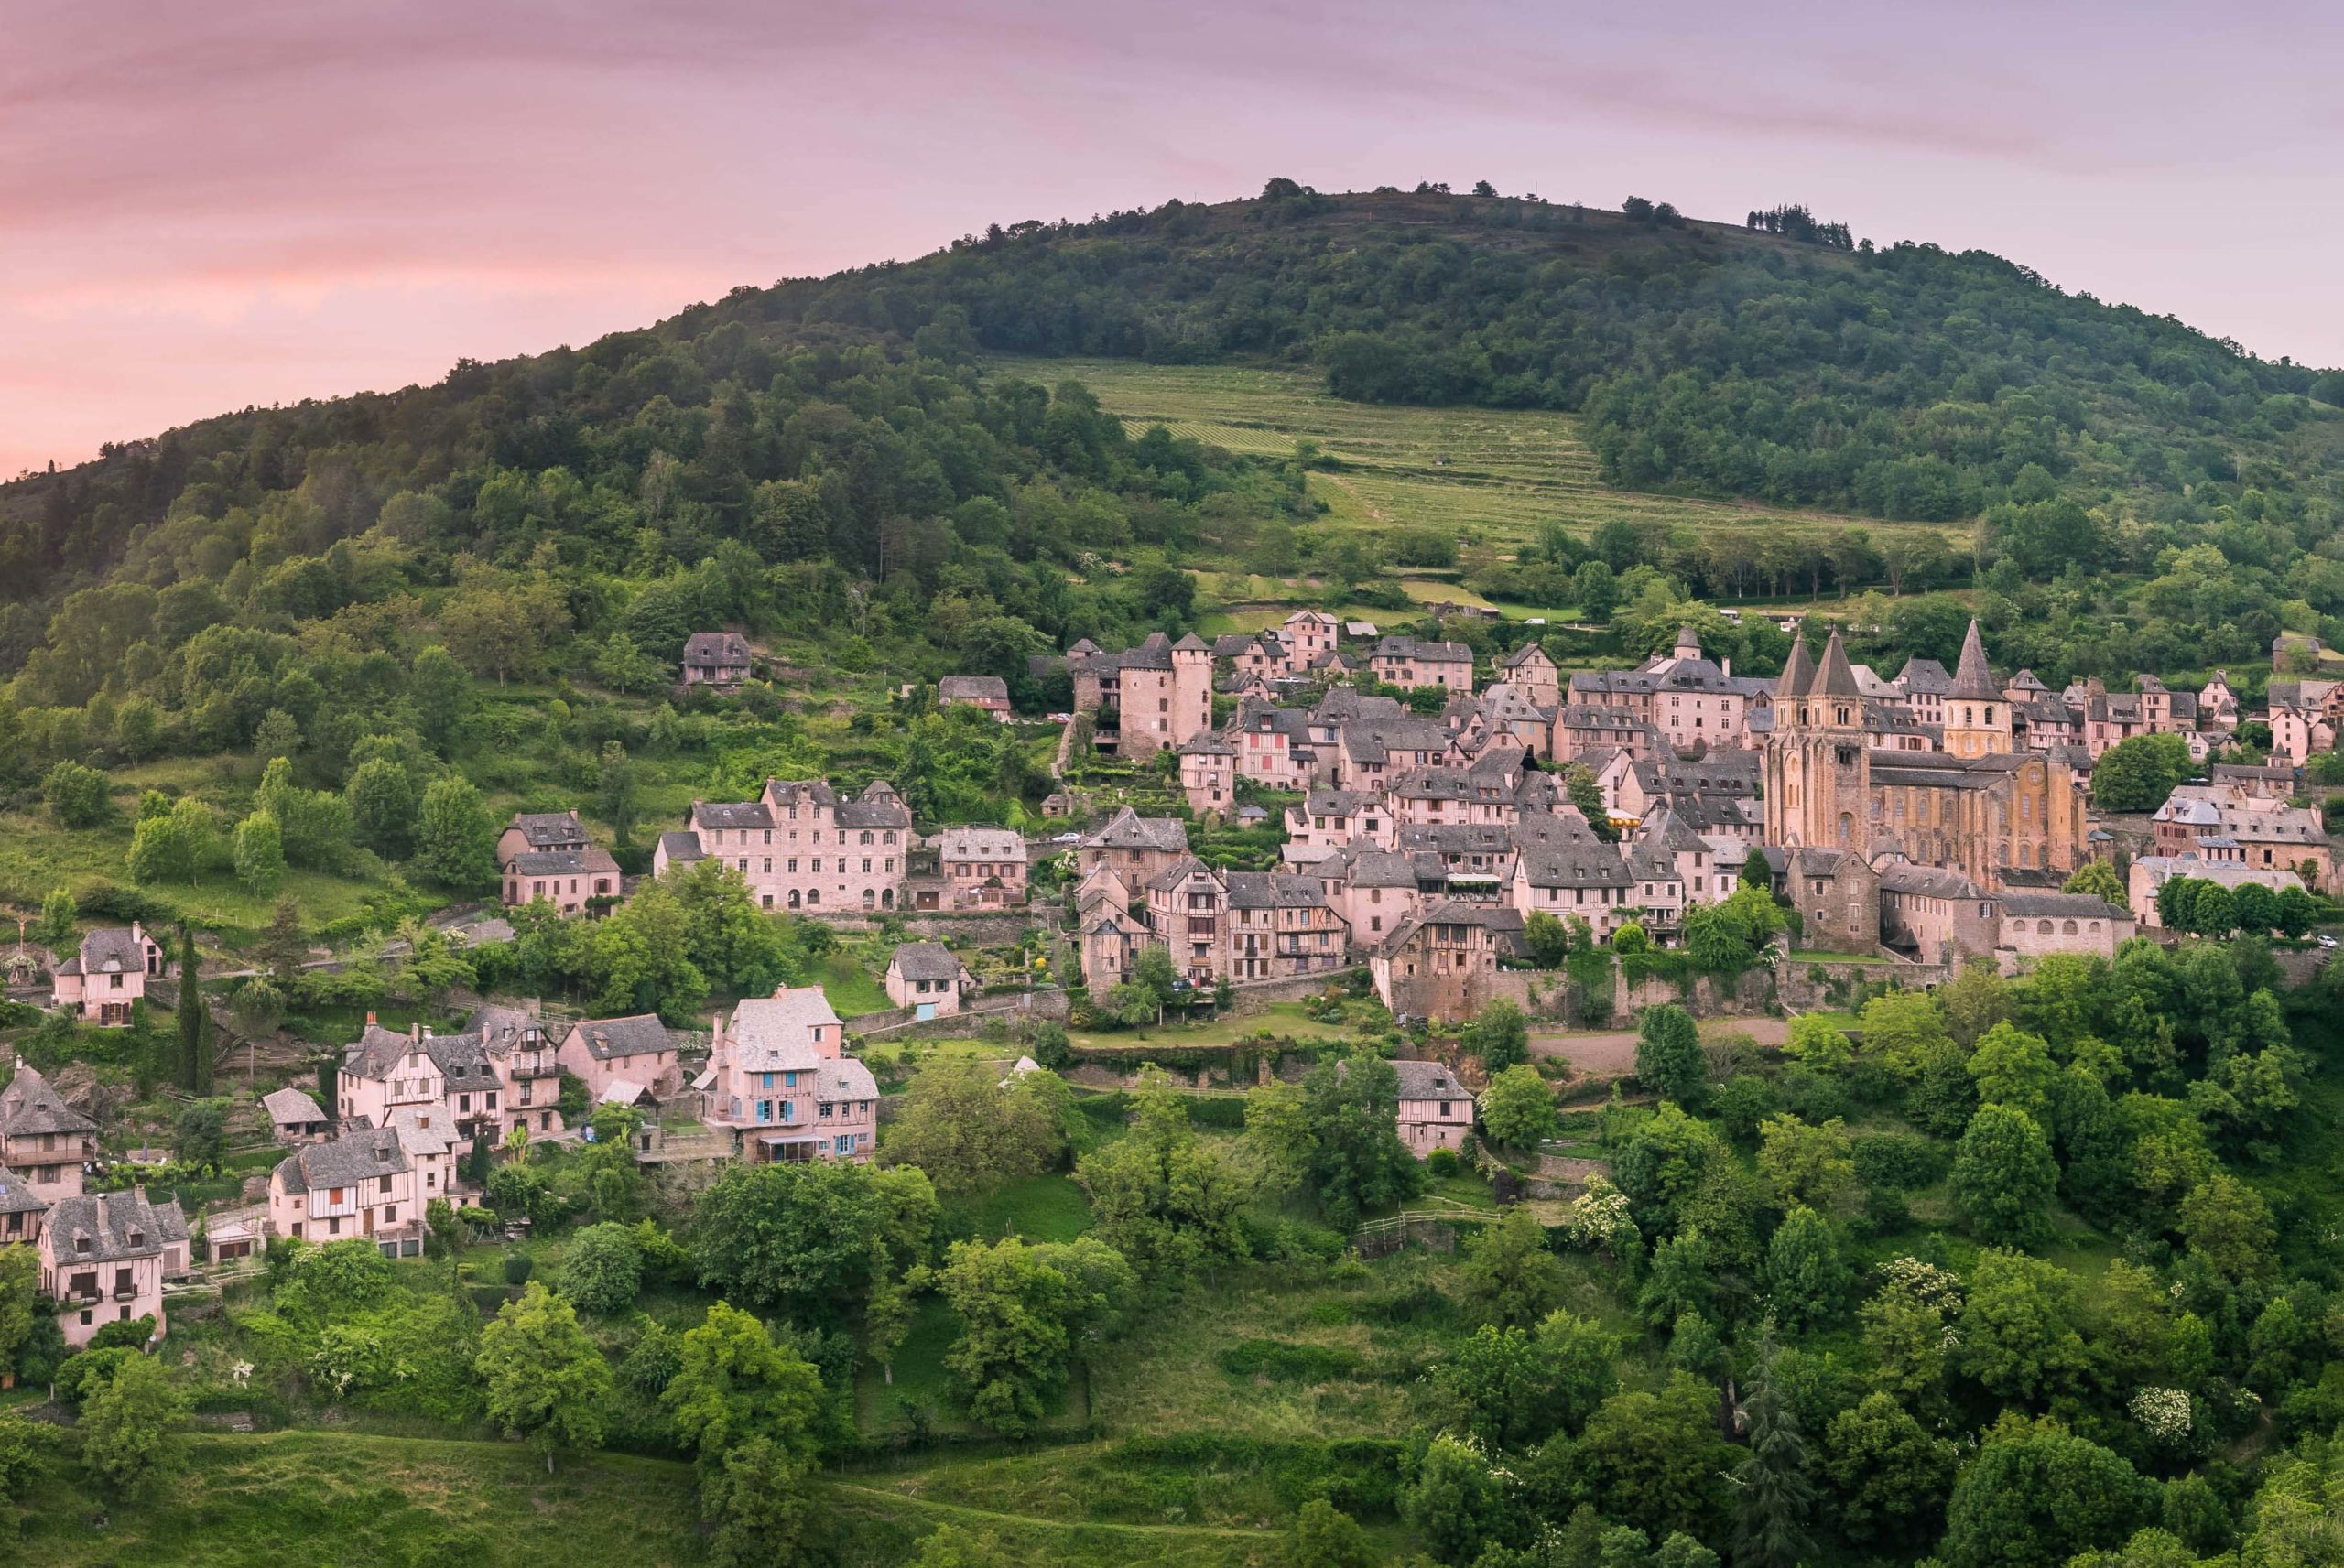 Villages in France - Conques © Krzysztof Golik - licence [CC BY-SA 4.0] from Wikimedia Commons